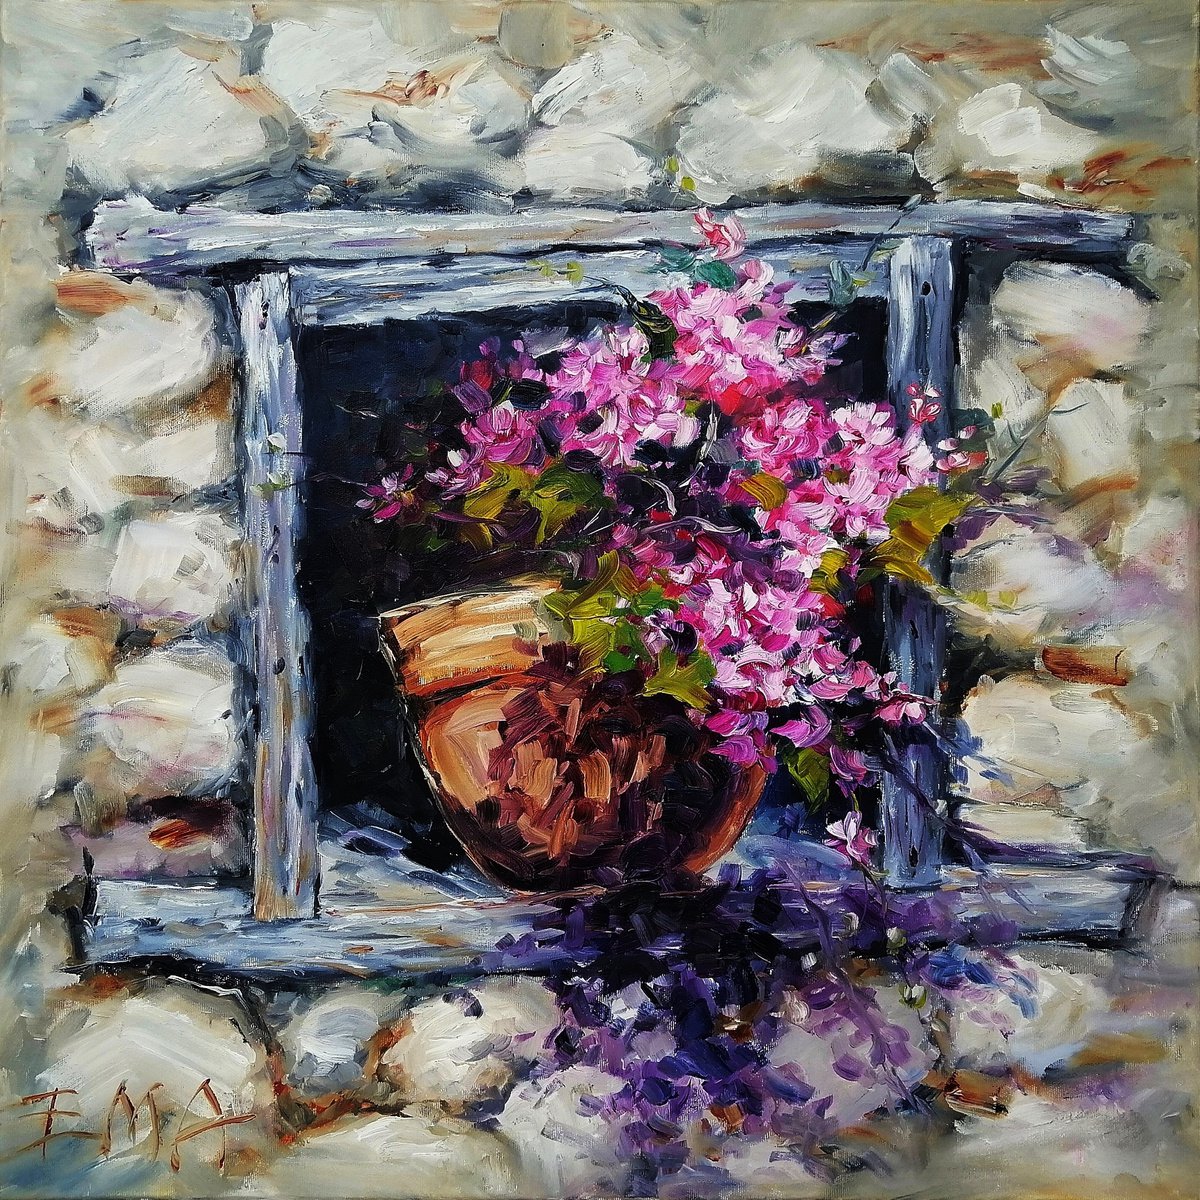 COUNTRY LIFE, 70x70cm, pink flowers by Emilia Milcheva